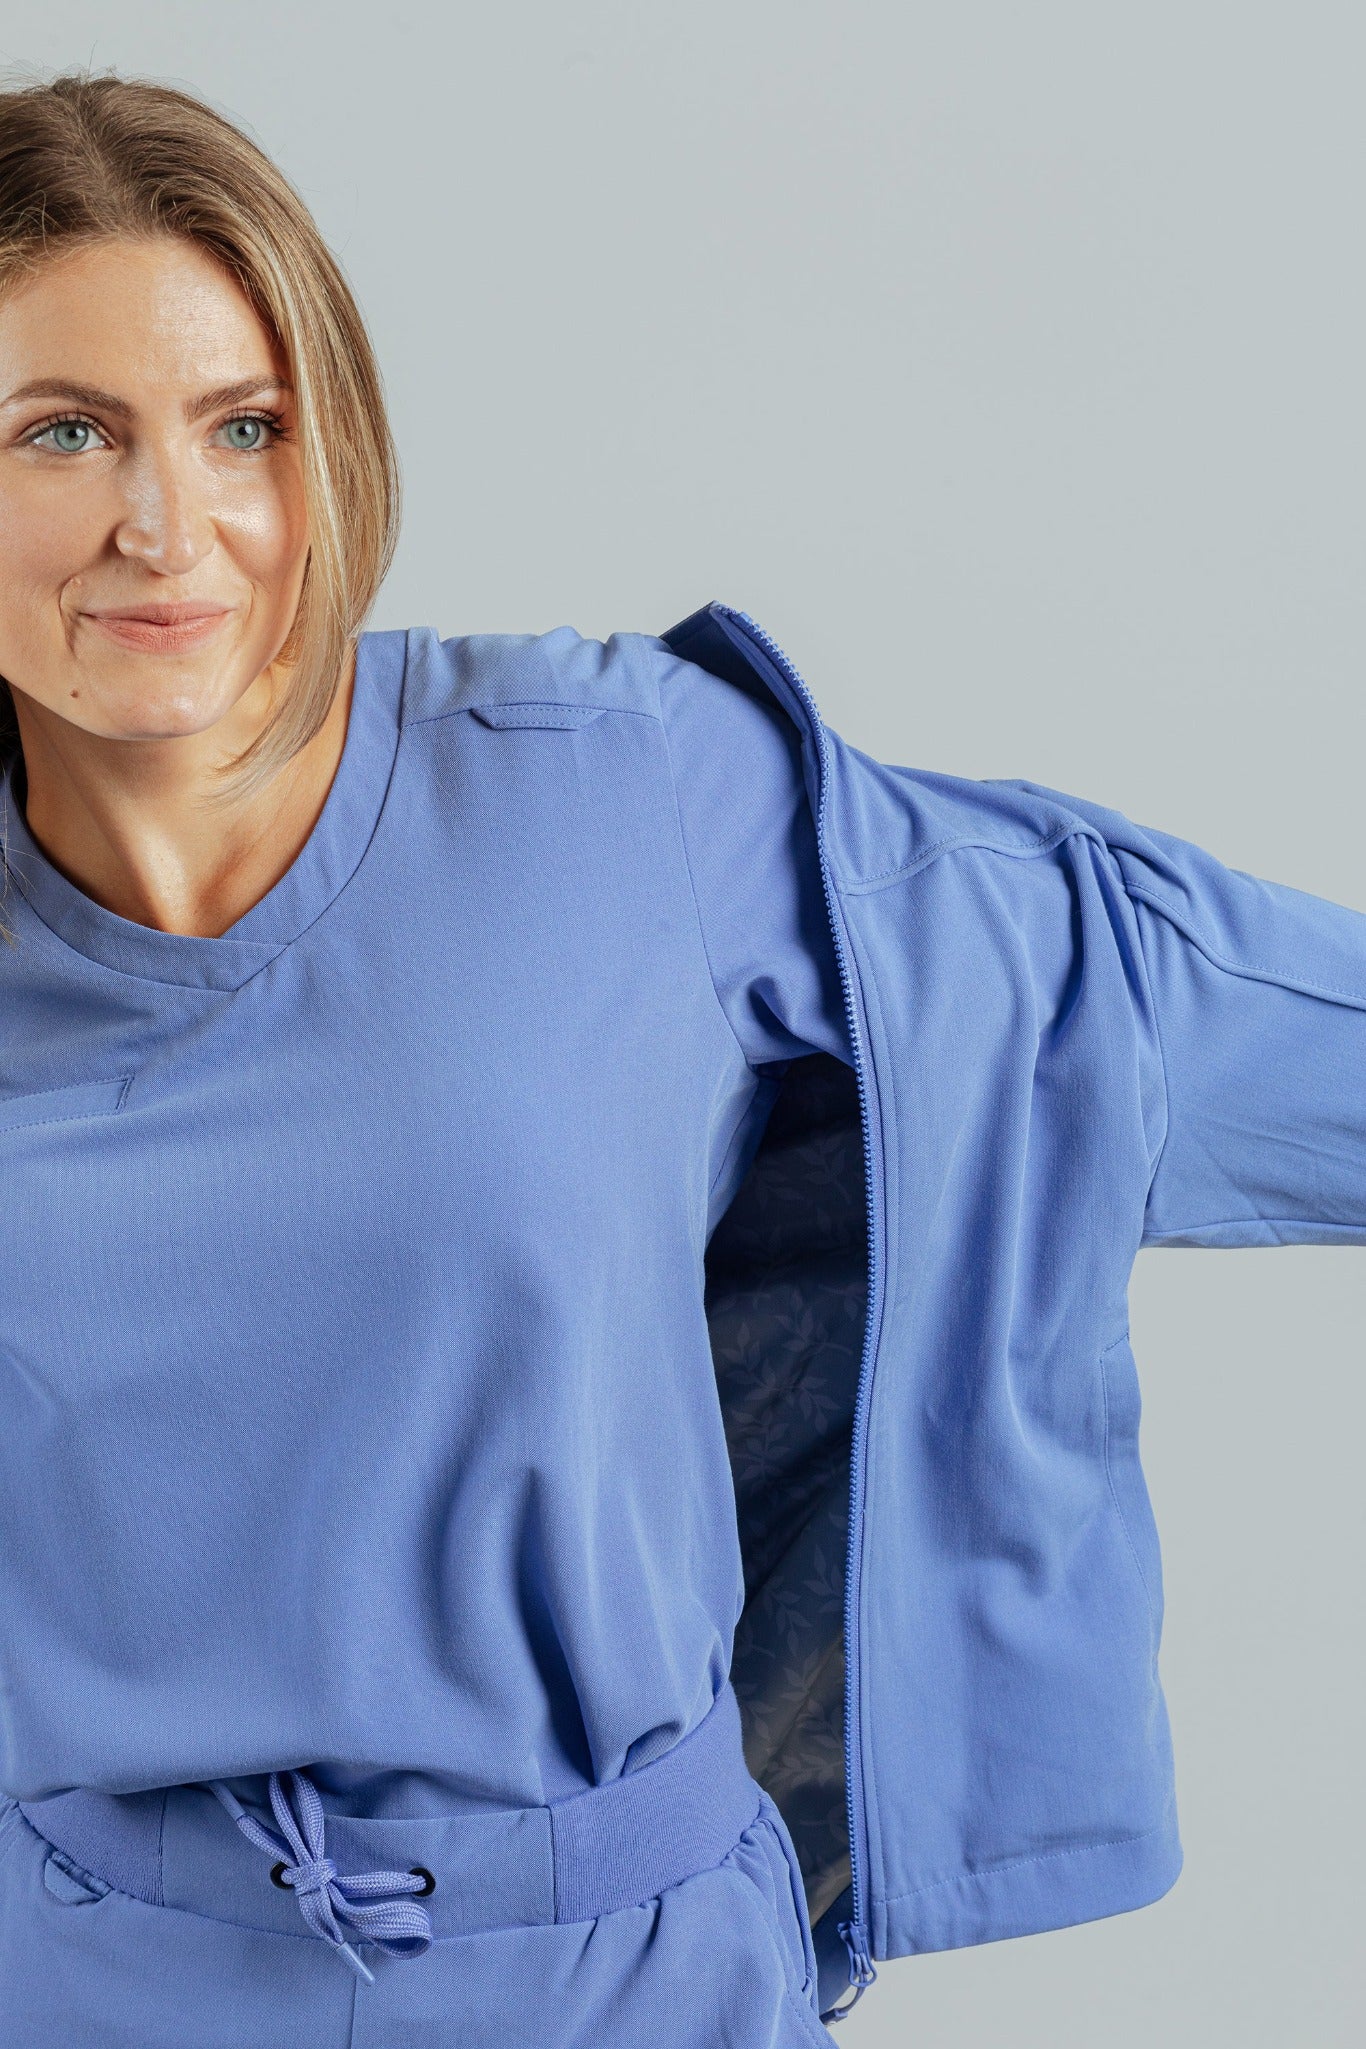 Apollo Scrubs - Hers - Jacket for women, antimicrobial, full zip with liner and pockets